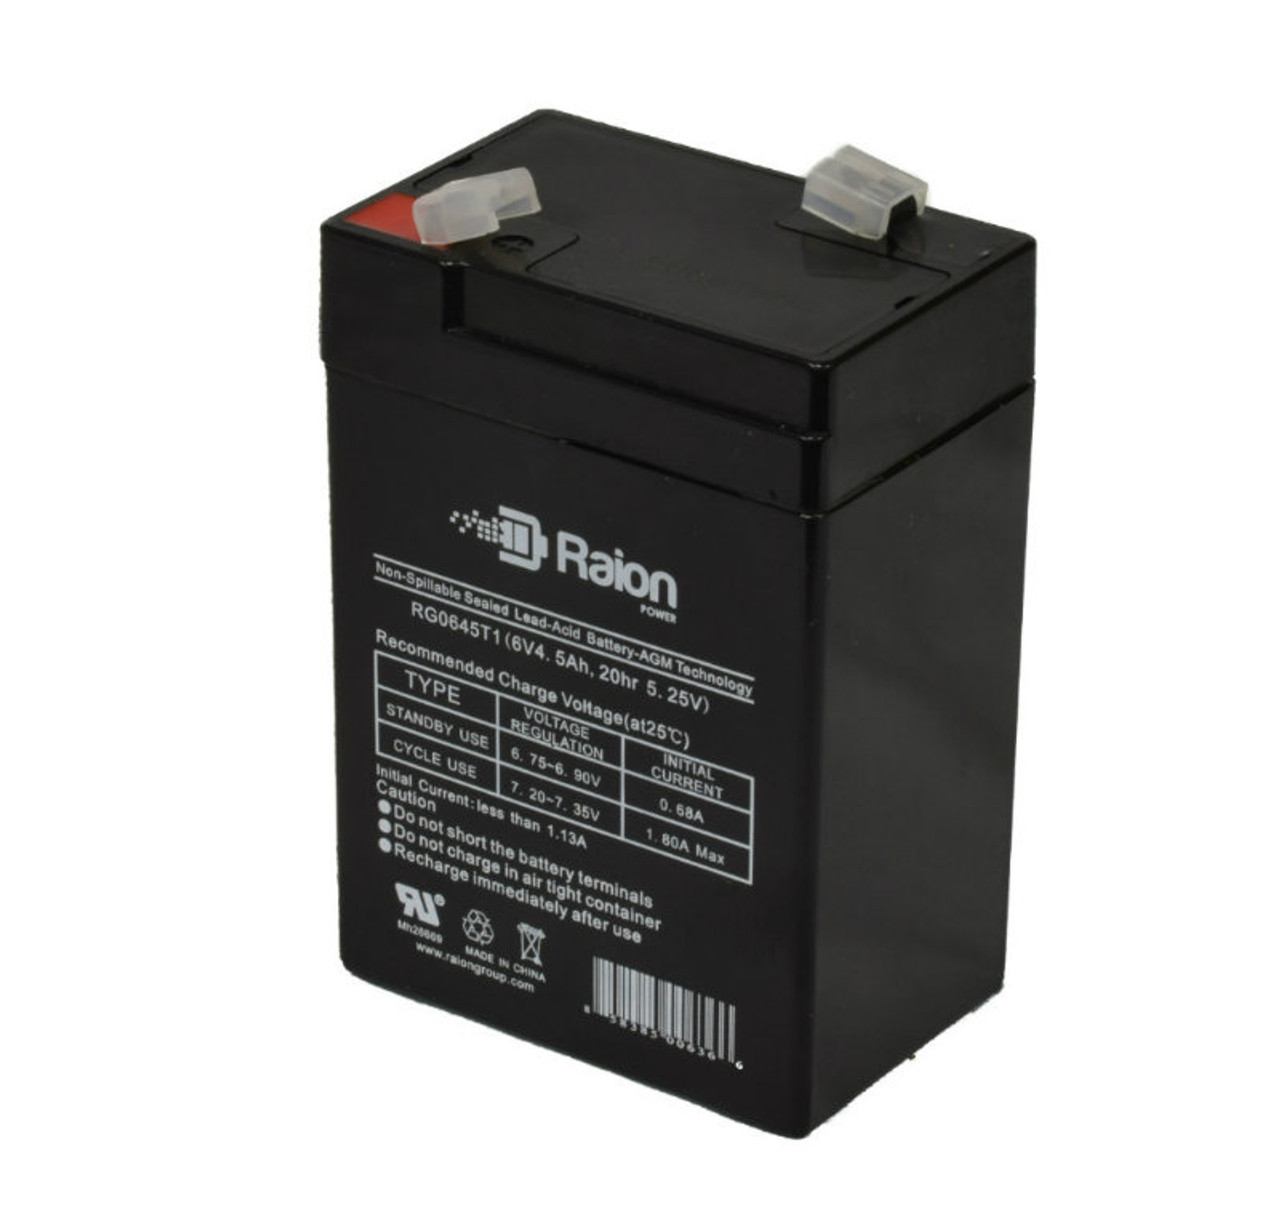 Raion Power RG0645T1 6V 4.5Ah Replacement Battery Cartridge for Kalee KL7005 Volvo C70